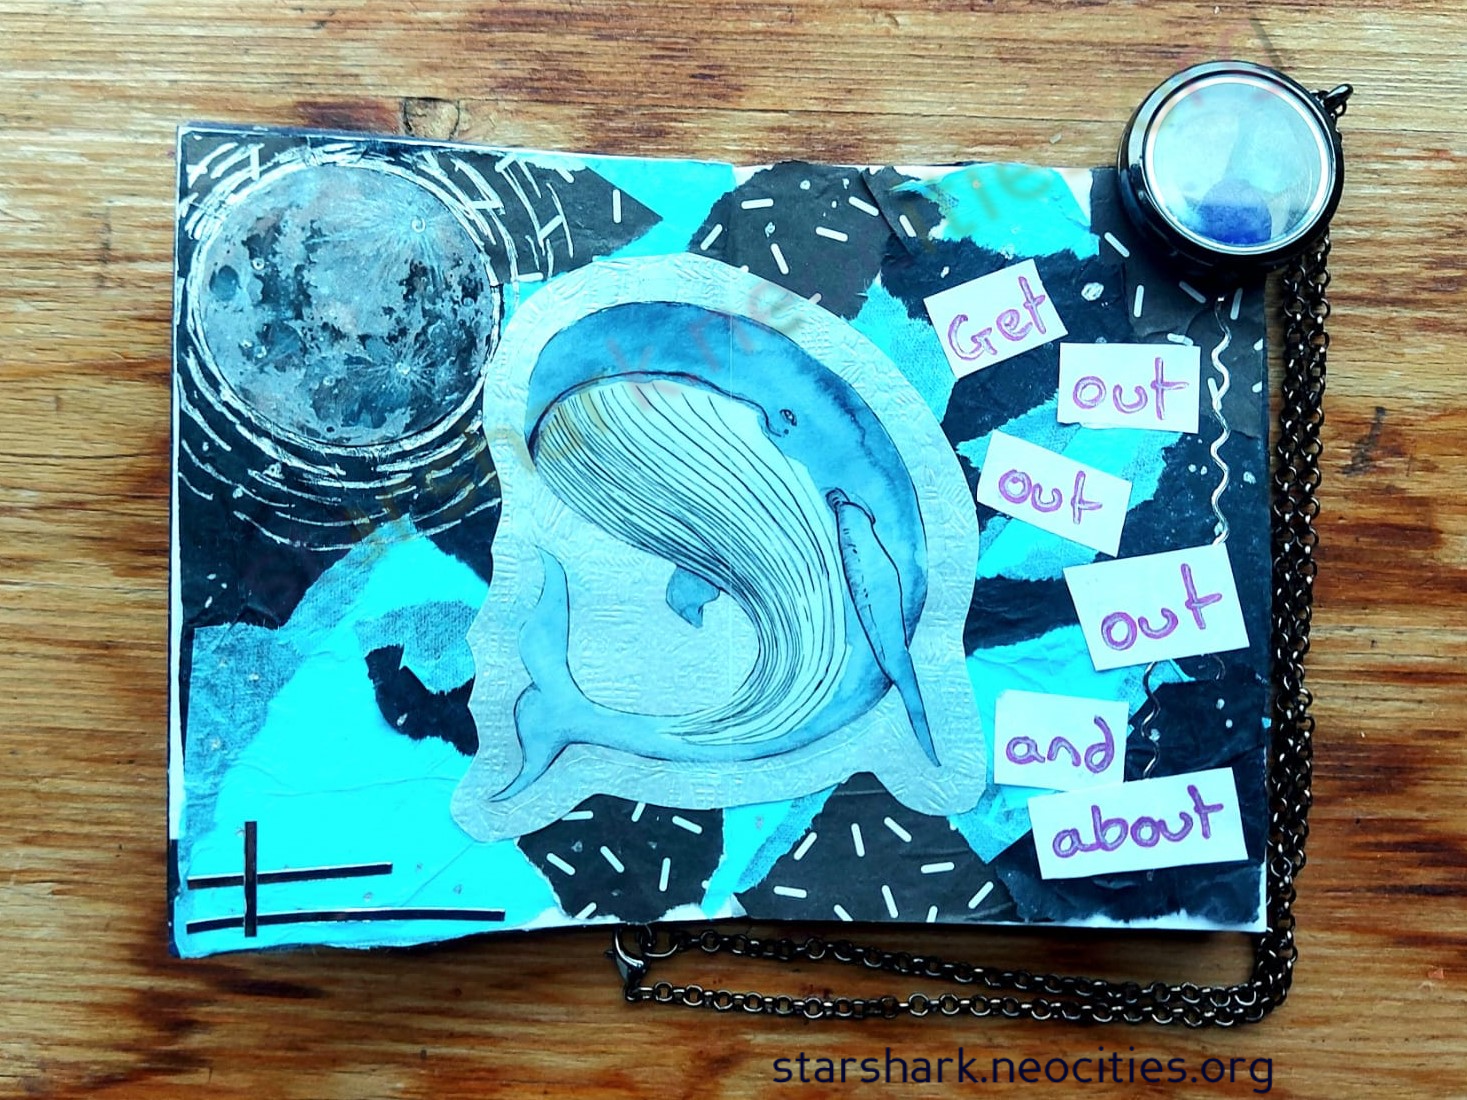 a two page spread of a mini-zine. There is a picture of a whale, the moon and reads 'get out, out, out and about'.